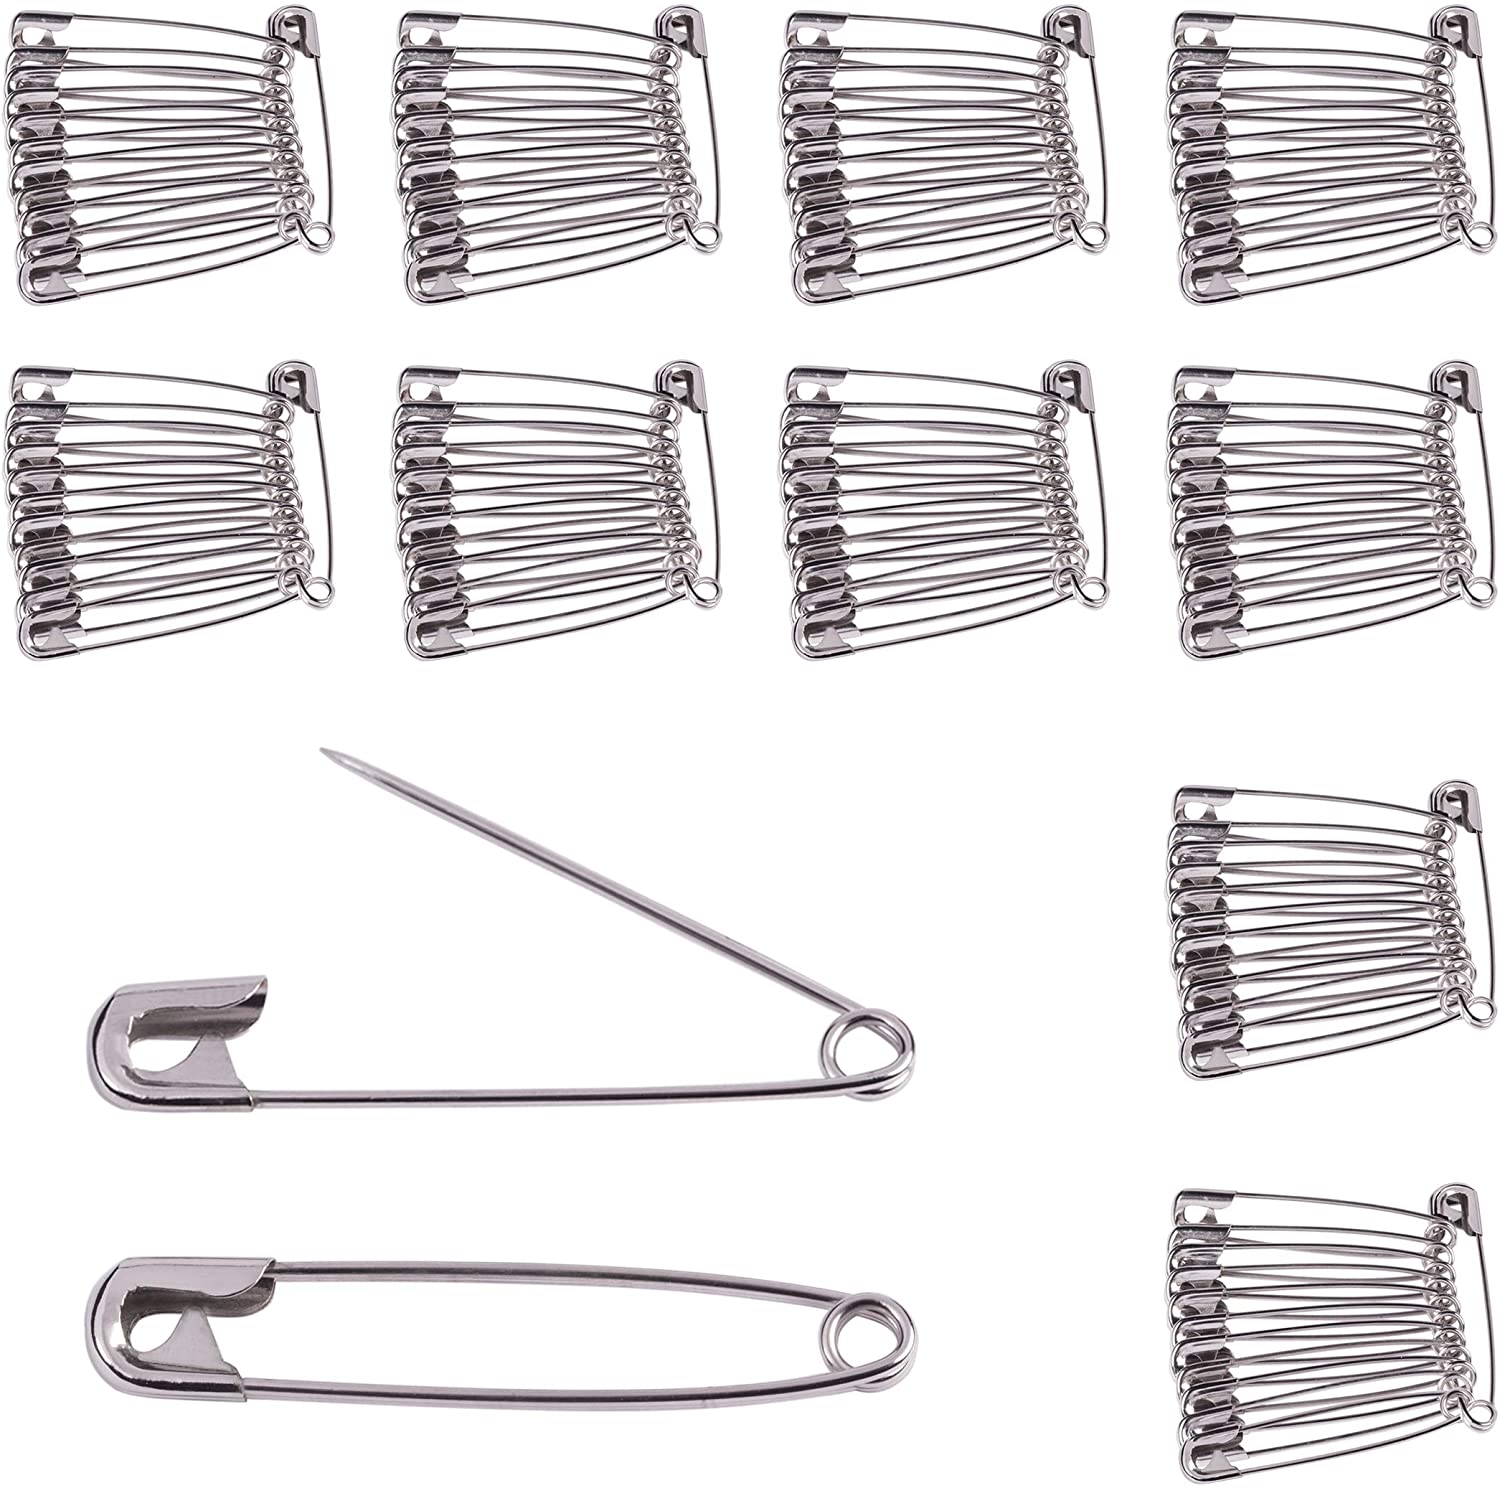 100Pc Silver Safety Pins Assorted Sizes Small Textiles Hemming & Crafts Large for Clothes Altering 